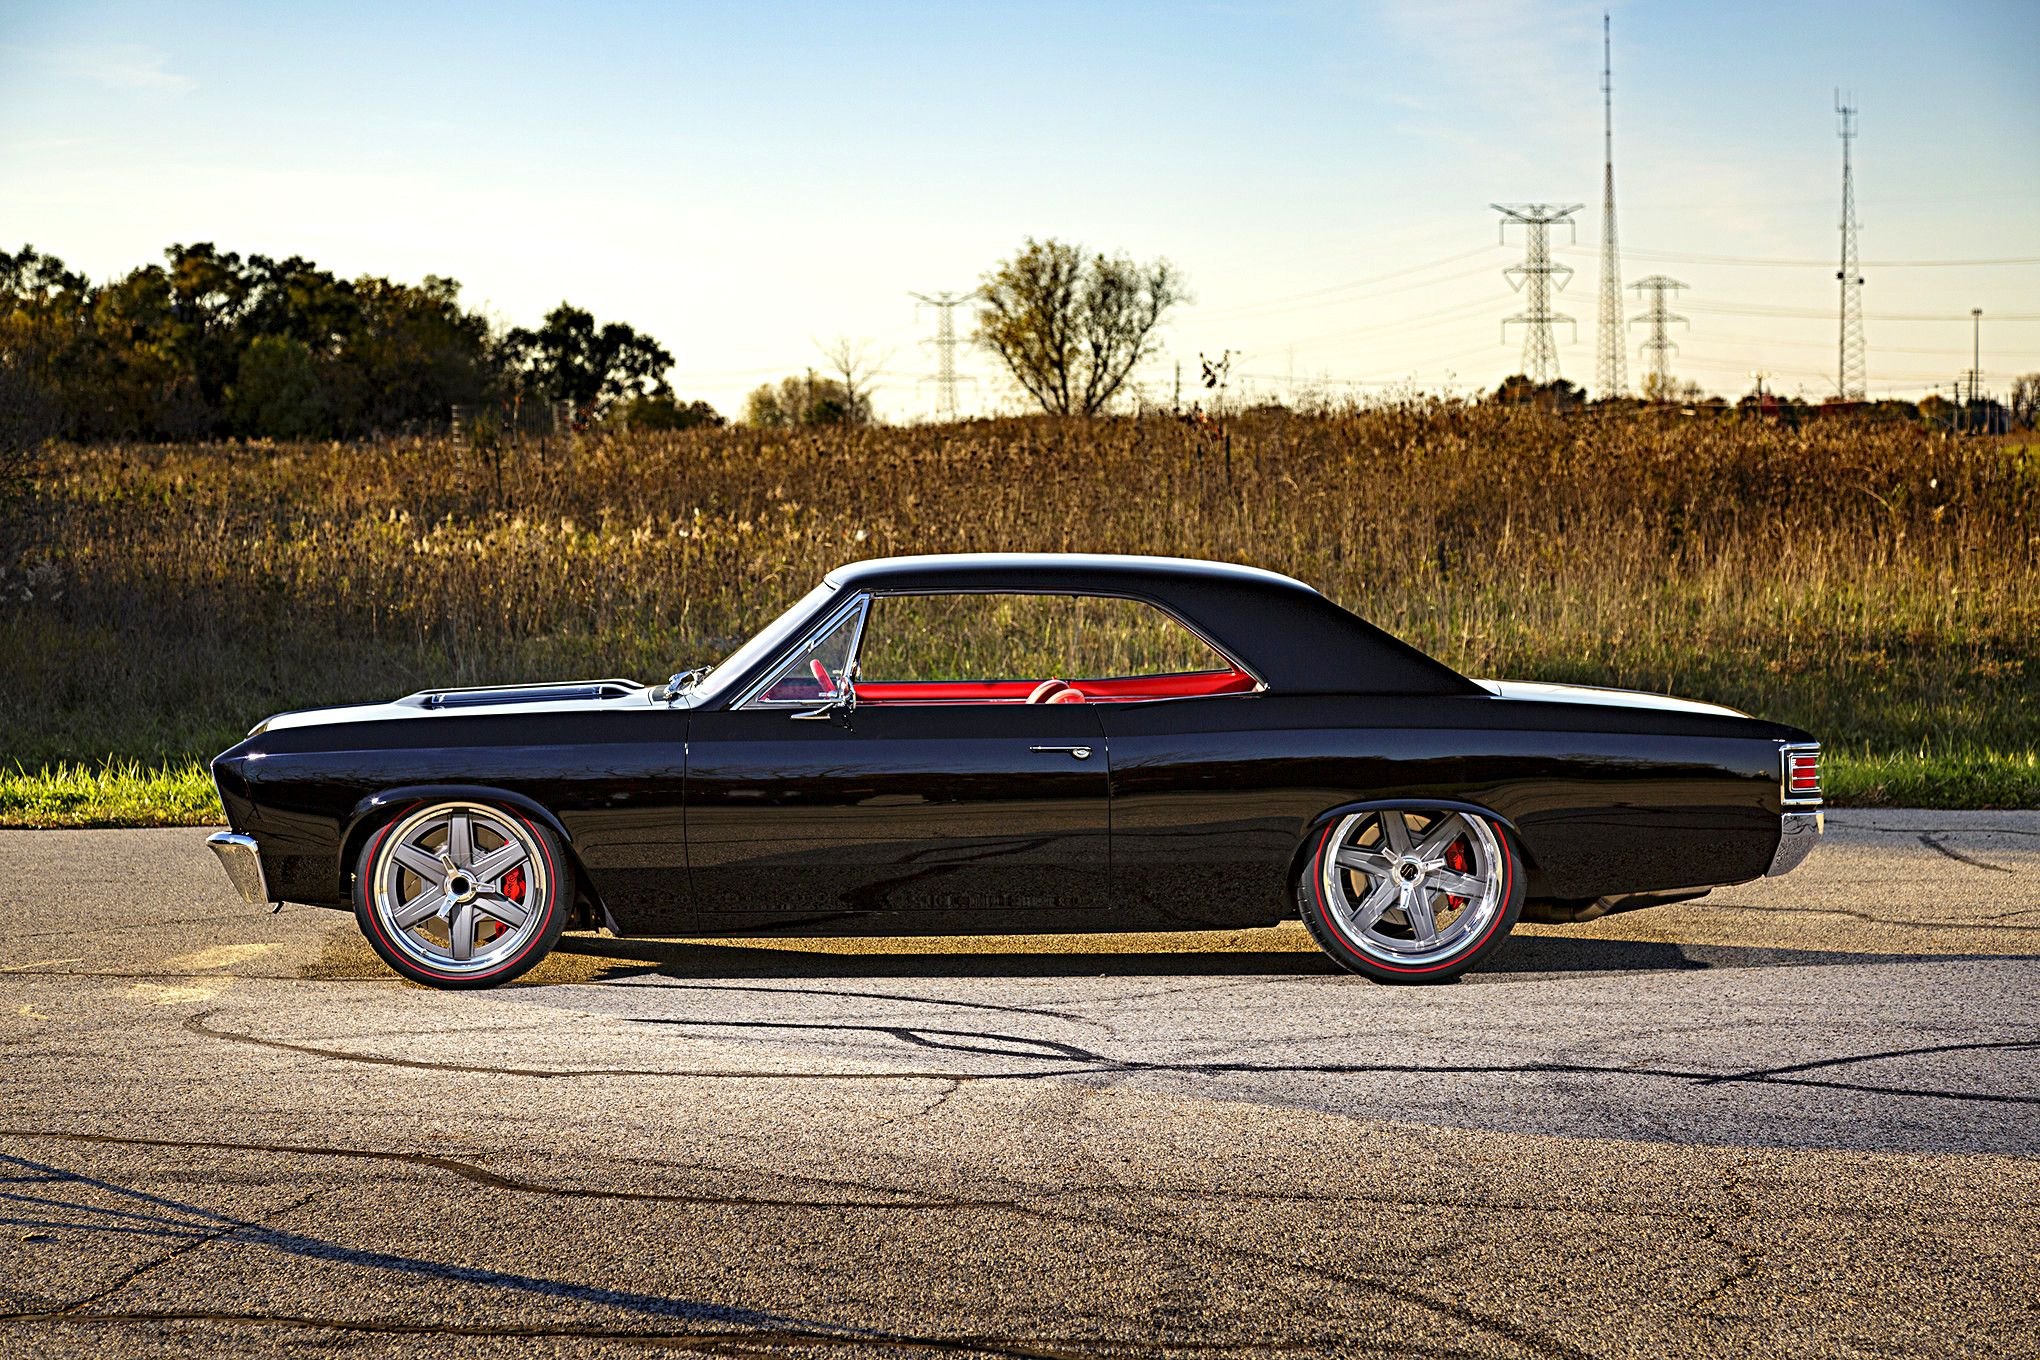 Custom Chrome Forgeline Rims on Black Chevy Chevelle - Photo by Forgeline Motorsports